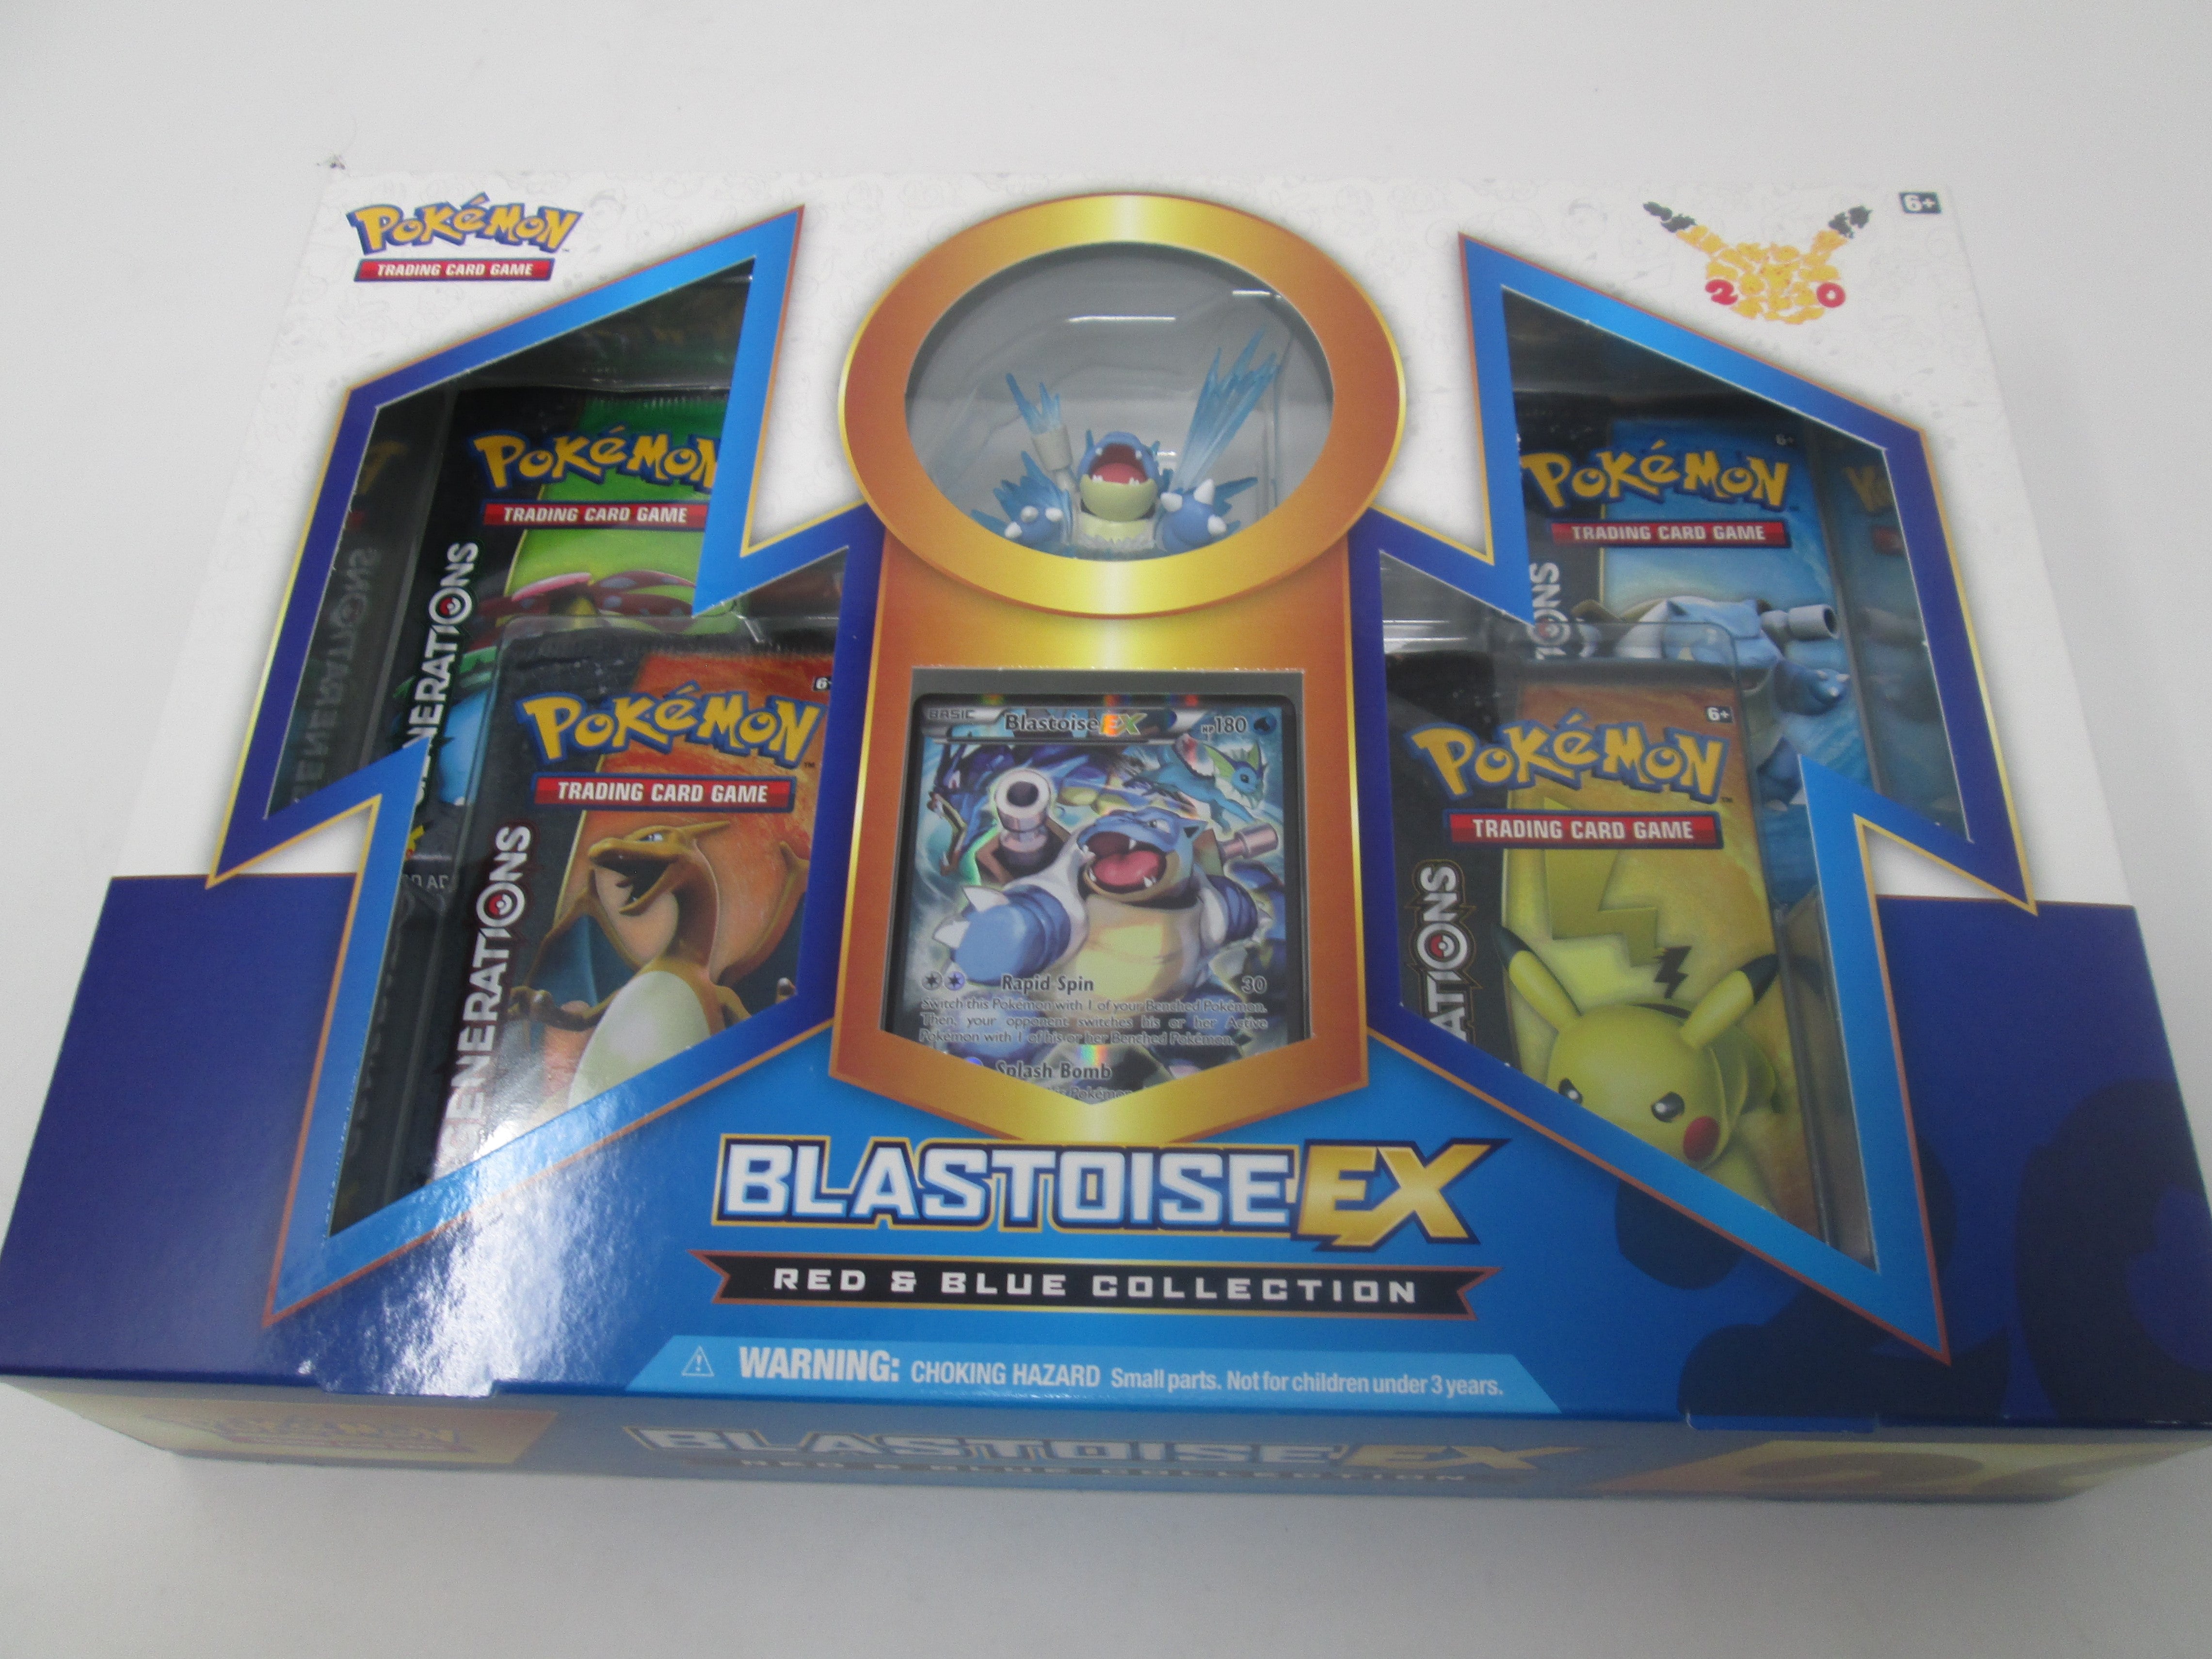 Pokemon TCG Red and Blue Collection Blastoise EX Box - BigBoi Cards